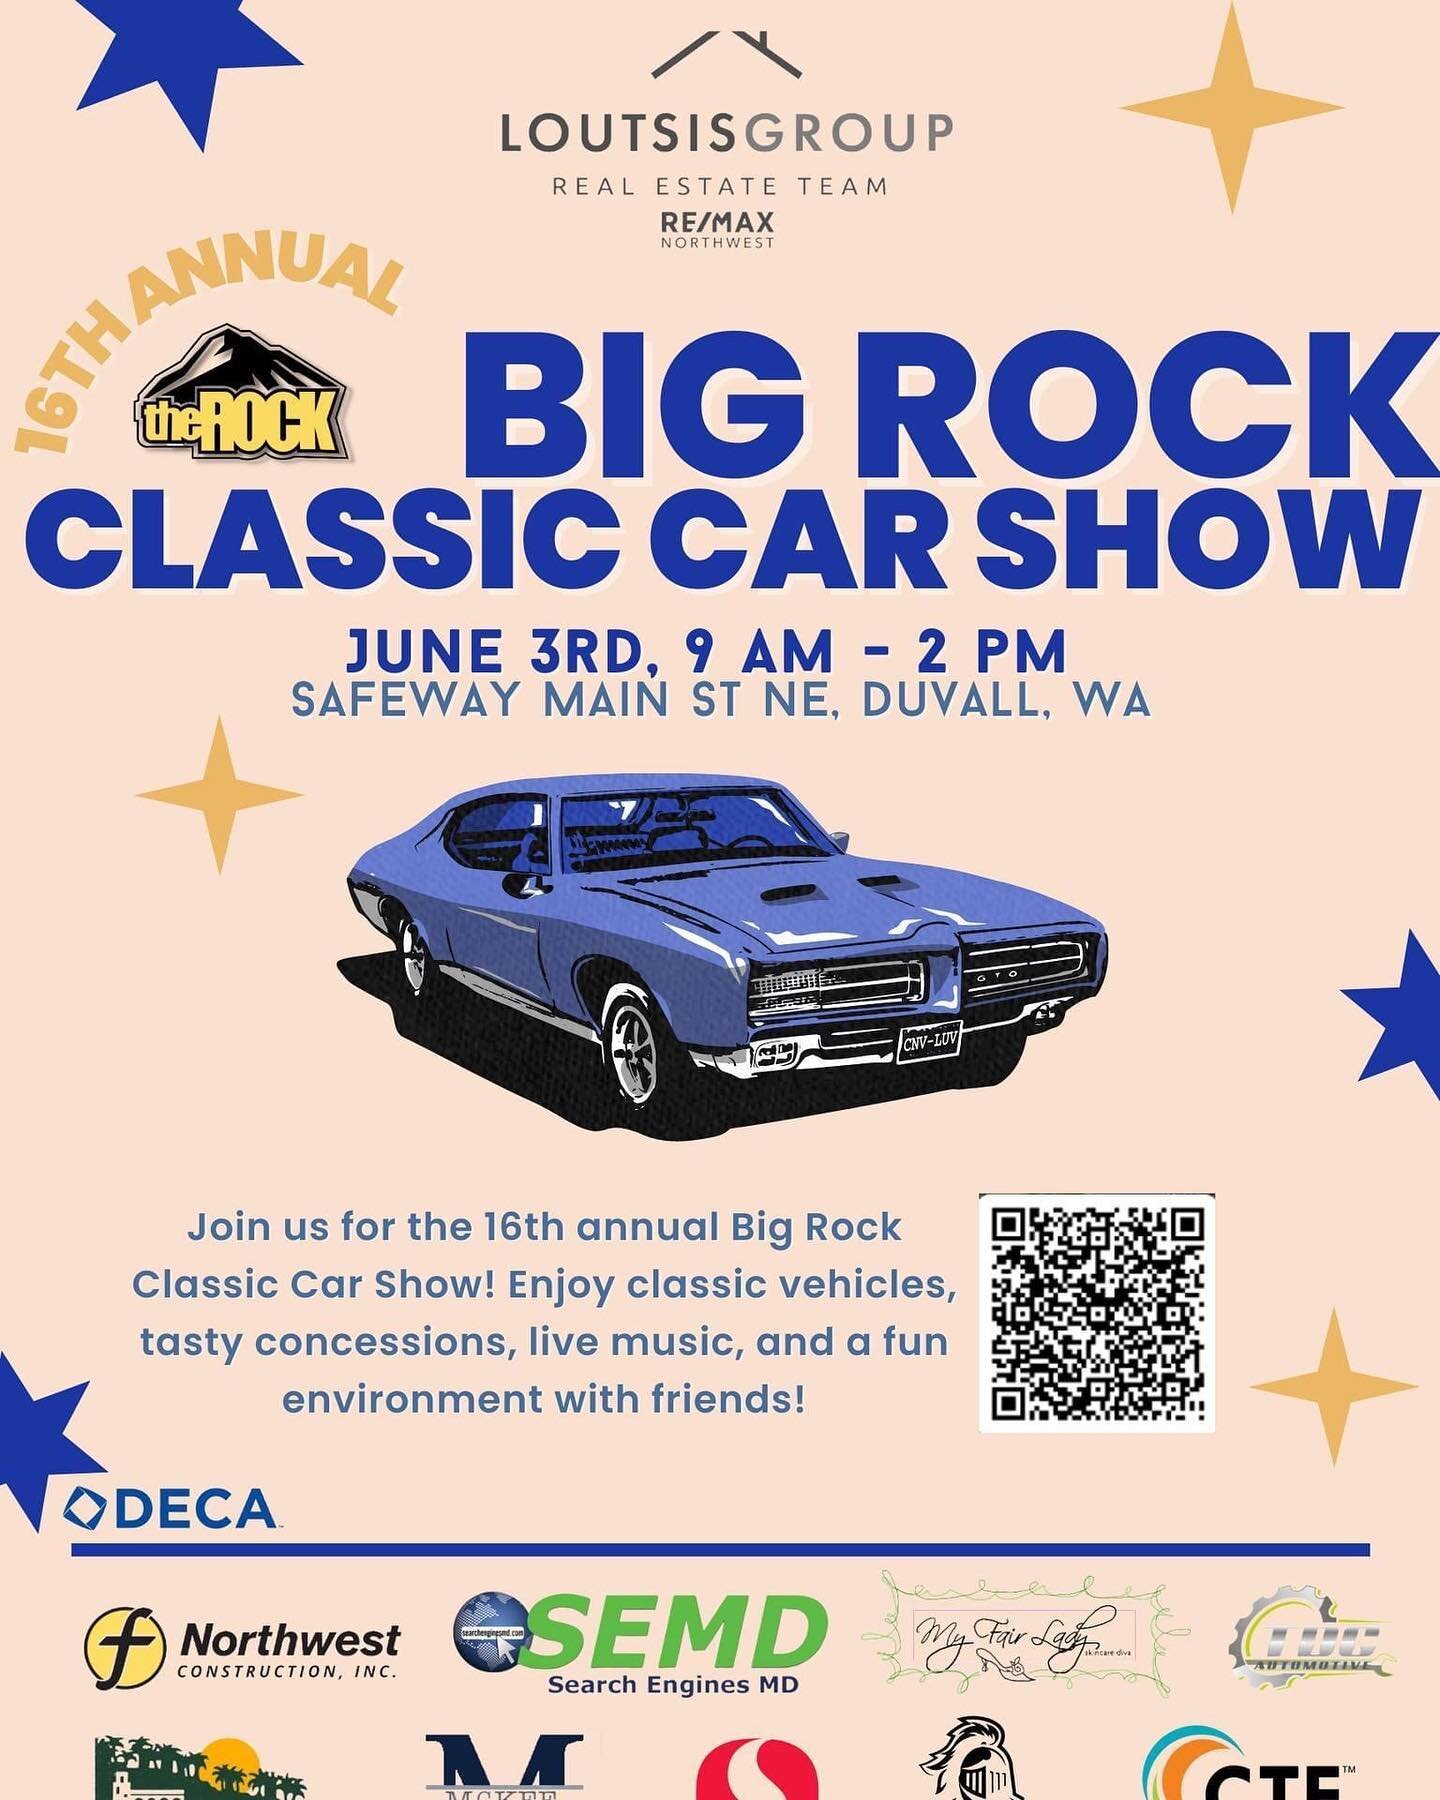 🌟 JOIN US TOMORROW 🌟

We are proud to be Presenting Sponsors of the 16th Annual Big Rock Classic Car Show in Duvall!

June 3, 2023
9:00 am - 2:00 pm
Safeway Duvall 

See some amazing classic cars, enjoy music and food!

#loutsisgroup #deca #bigrock